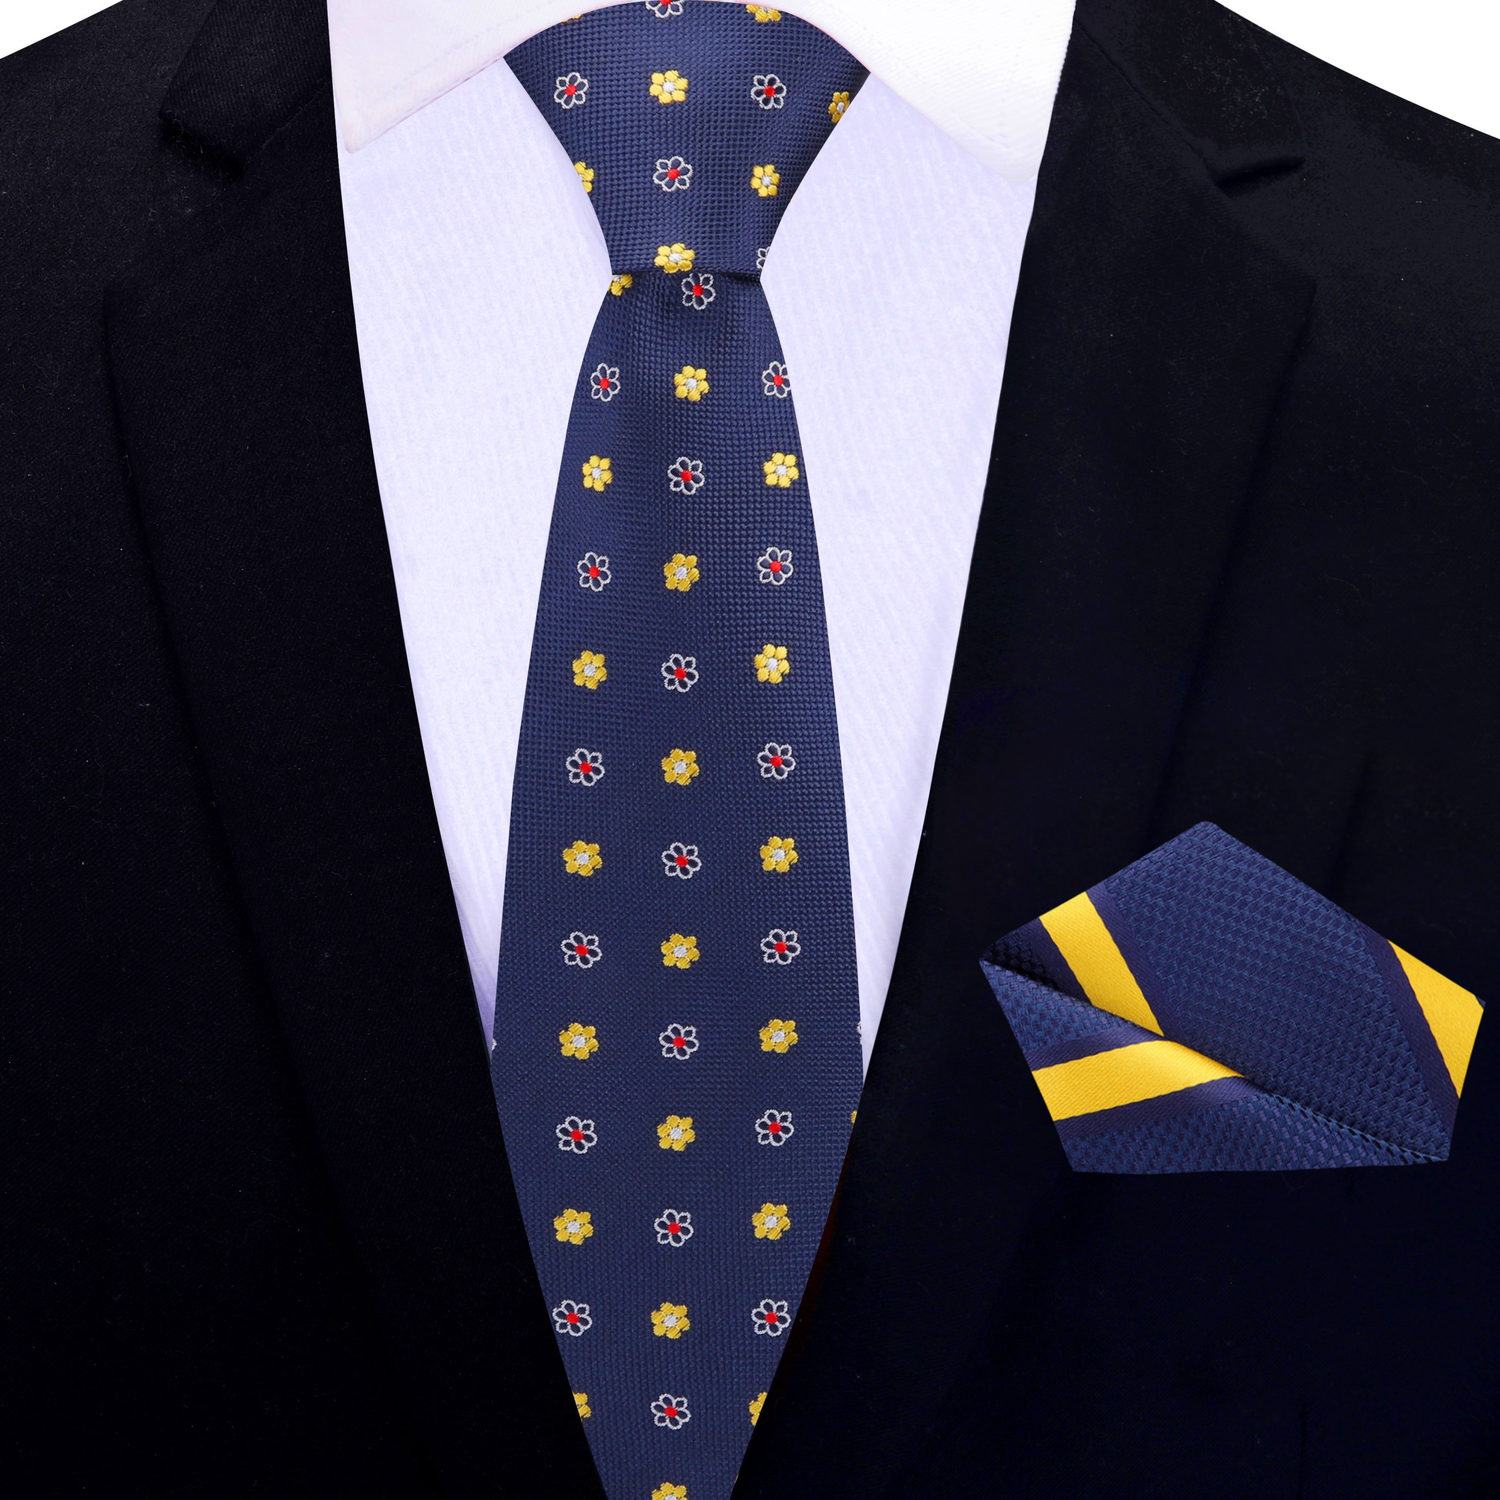 Thin Tie: Blue, Yellow and Red Small Flowers Tie and Blue and Yellow Stripe Square